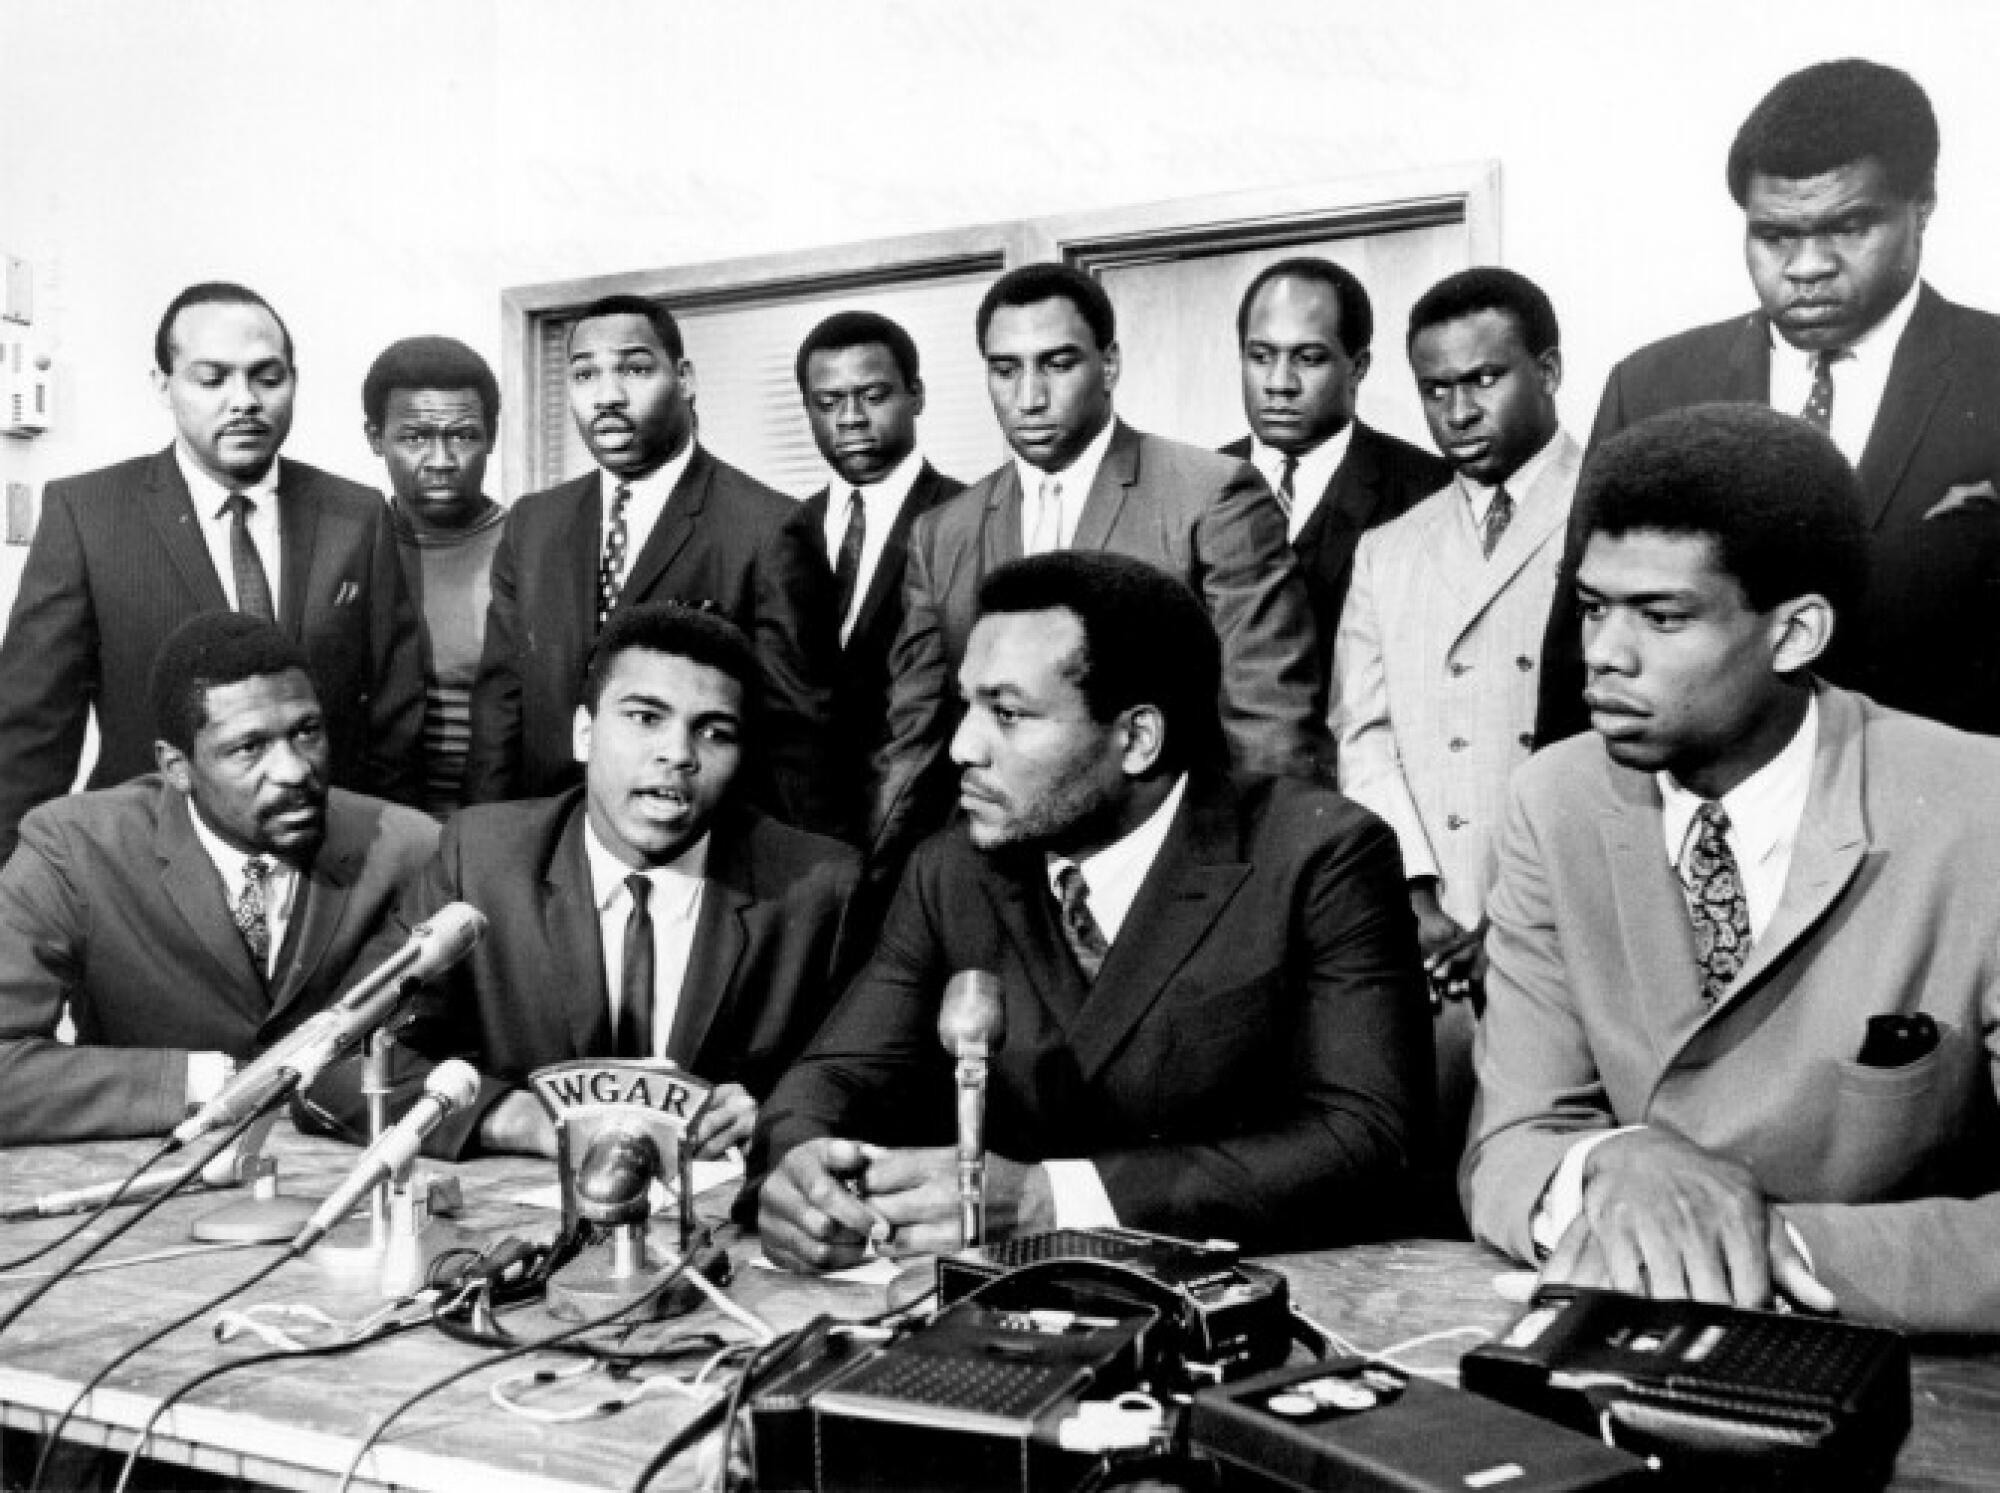 Bill Russell, first row far left, was among the Black athletes who attended the Cleveland Summit in 1967.